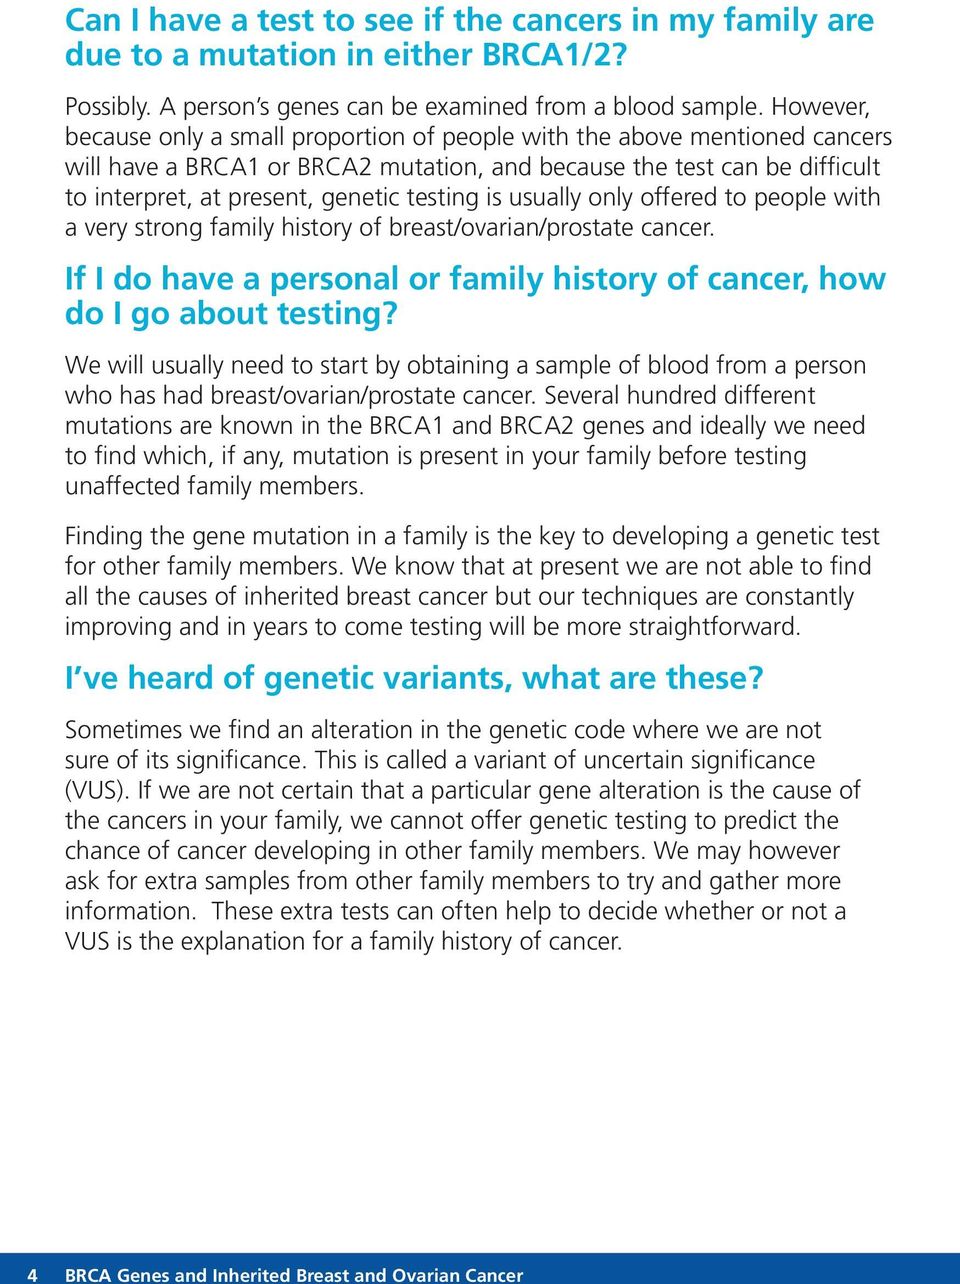 testing is usually only offered to people with a very strong family history of breast/ovarian/prostate cancer. If I do have a personal or family history of cancer, how do I go about testing?